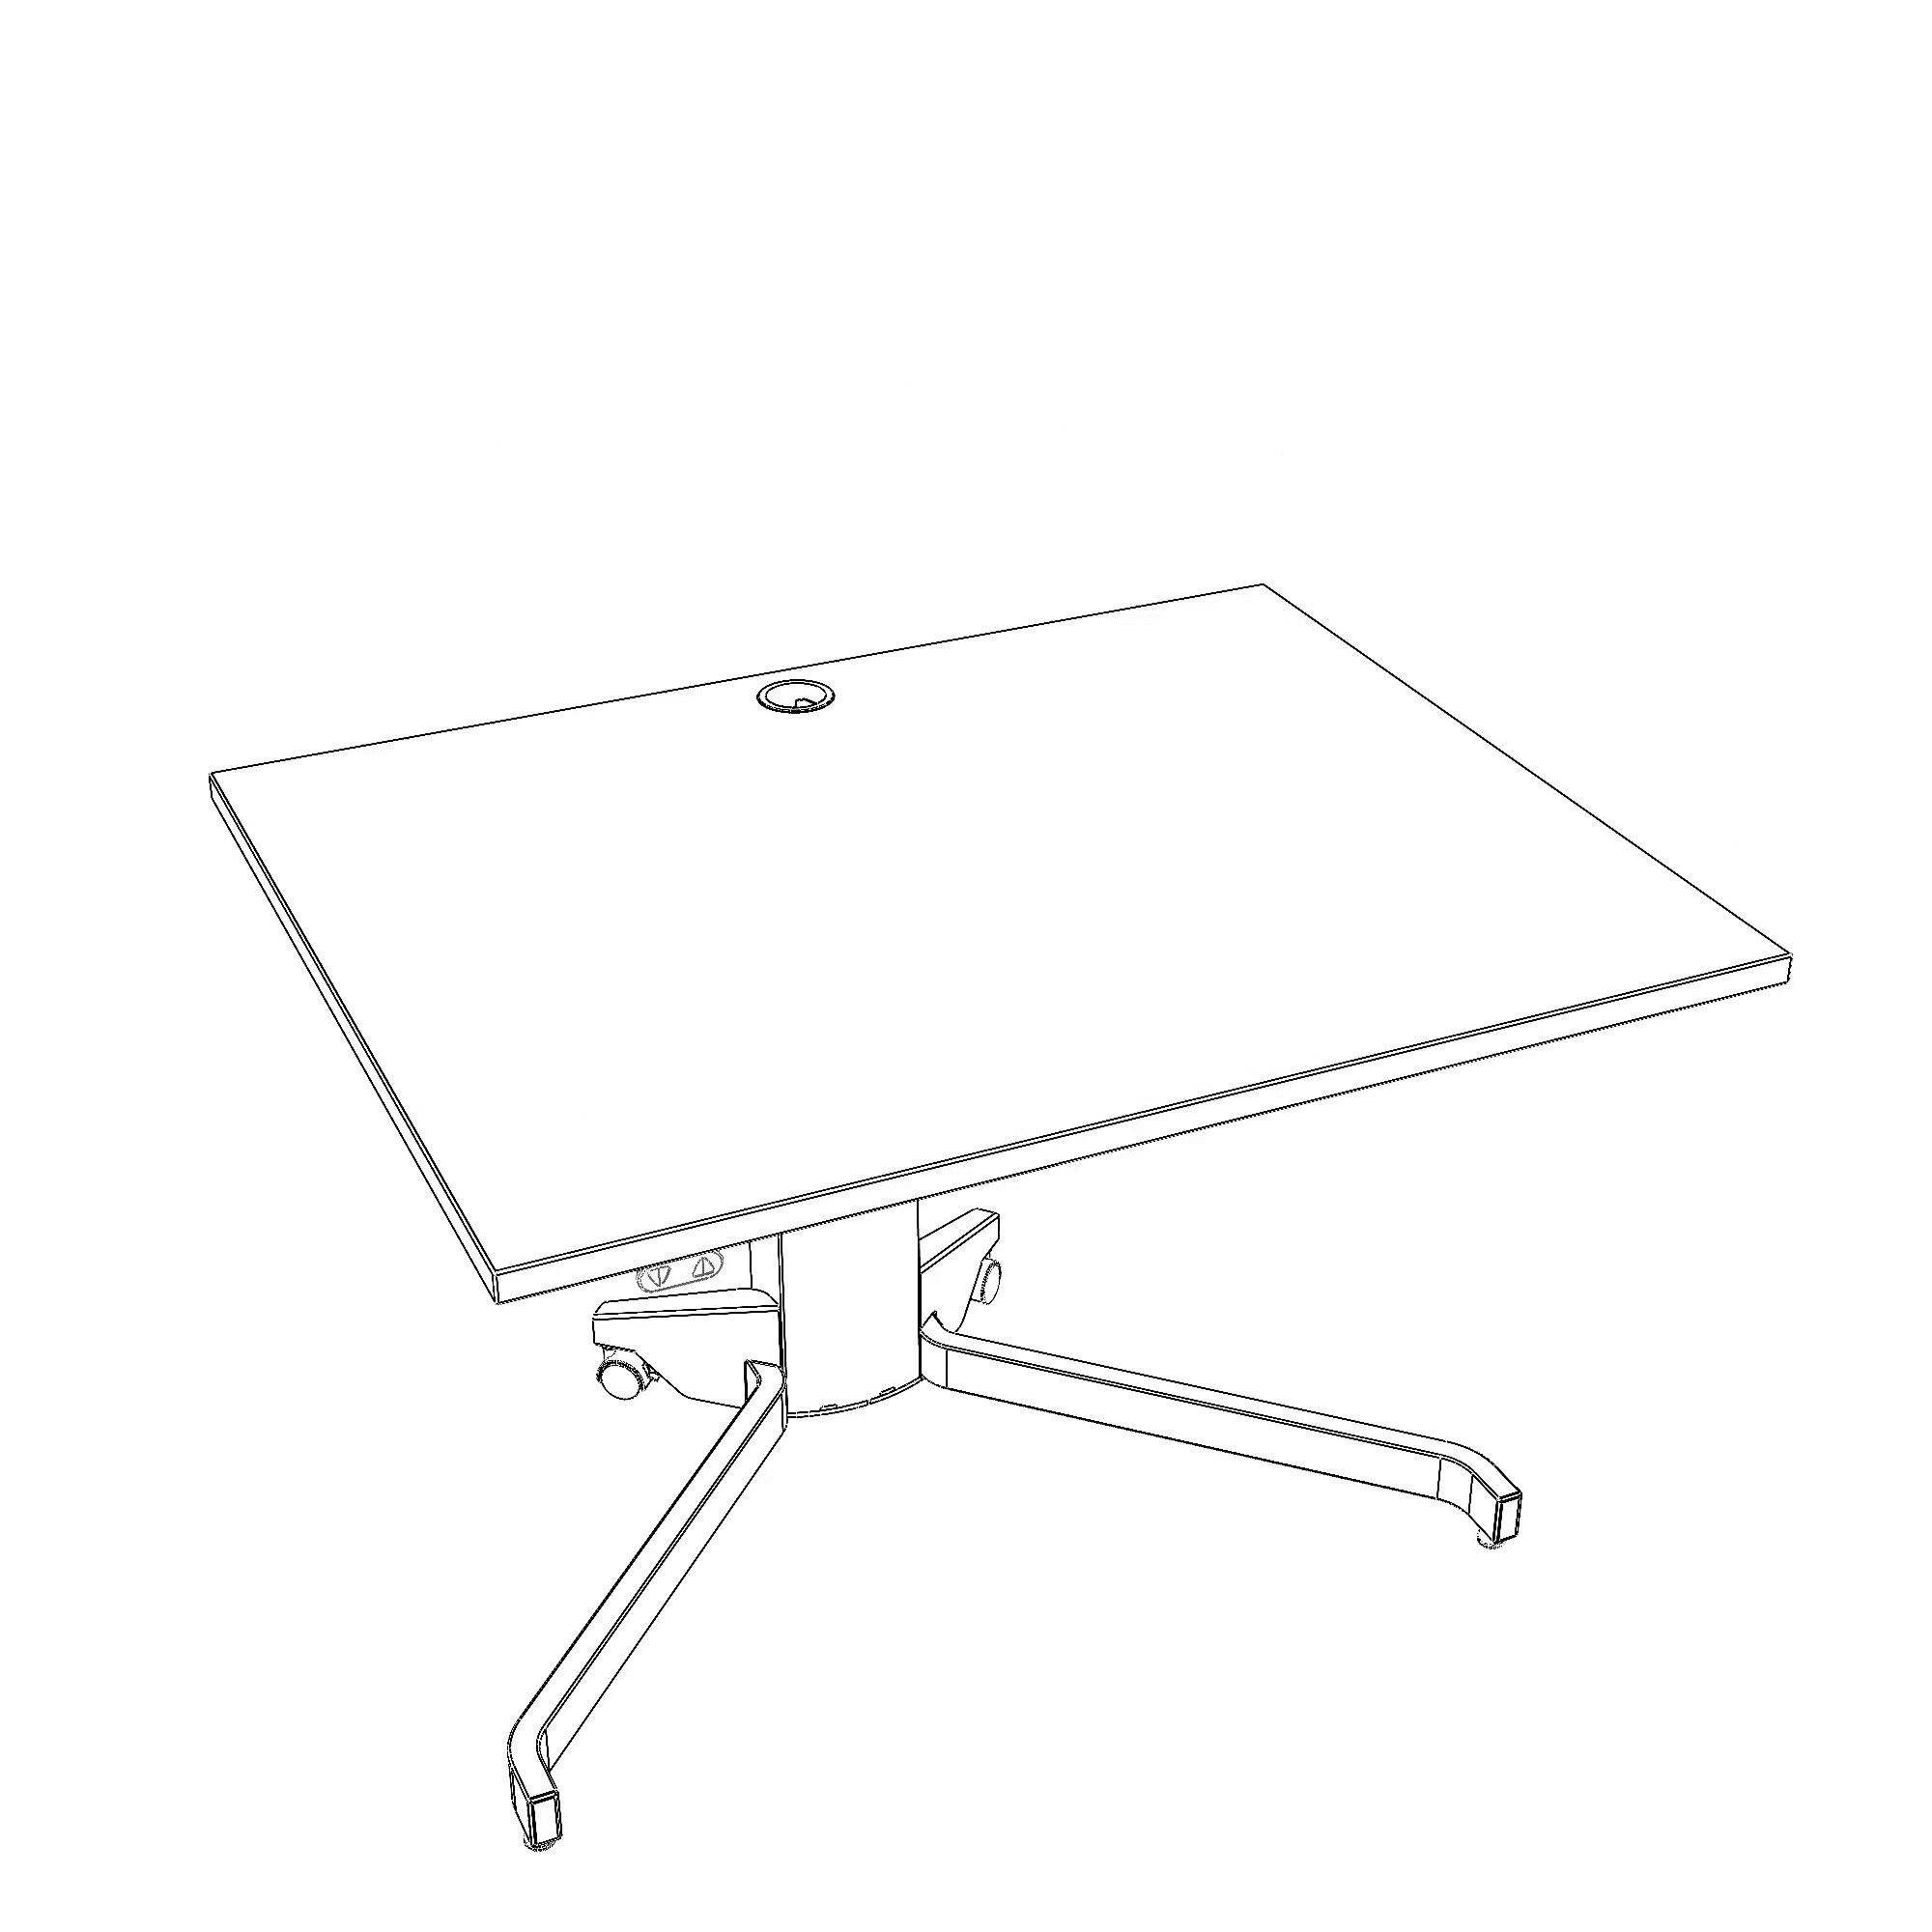 Electric Adjustable Desk | 120x60 cm | White with silver frame